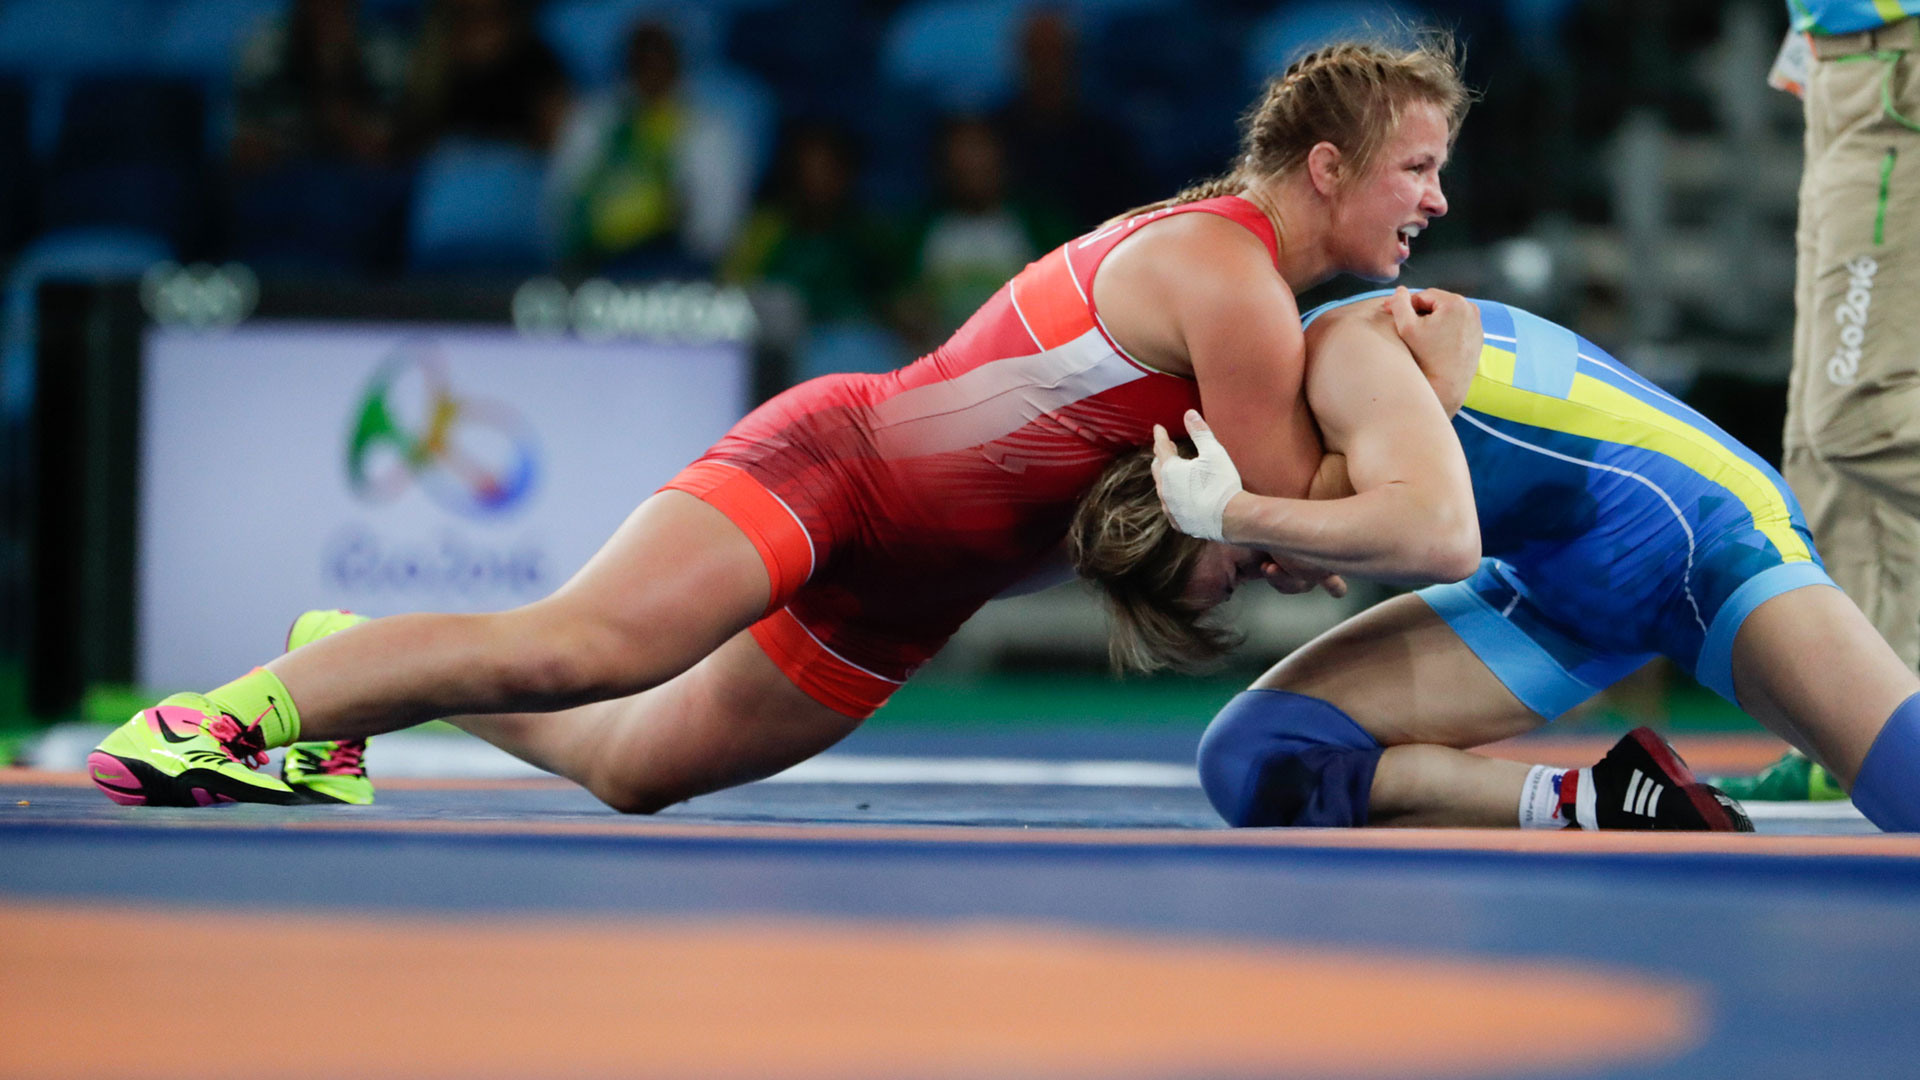 Canadas Erica Wiebe Is Grappling Towards Another Olympic Gold—and an MBA Complex